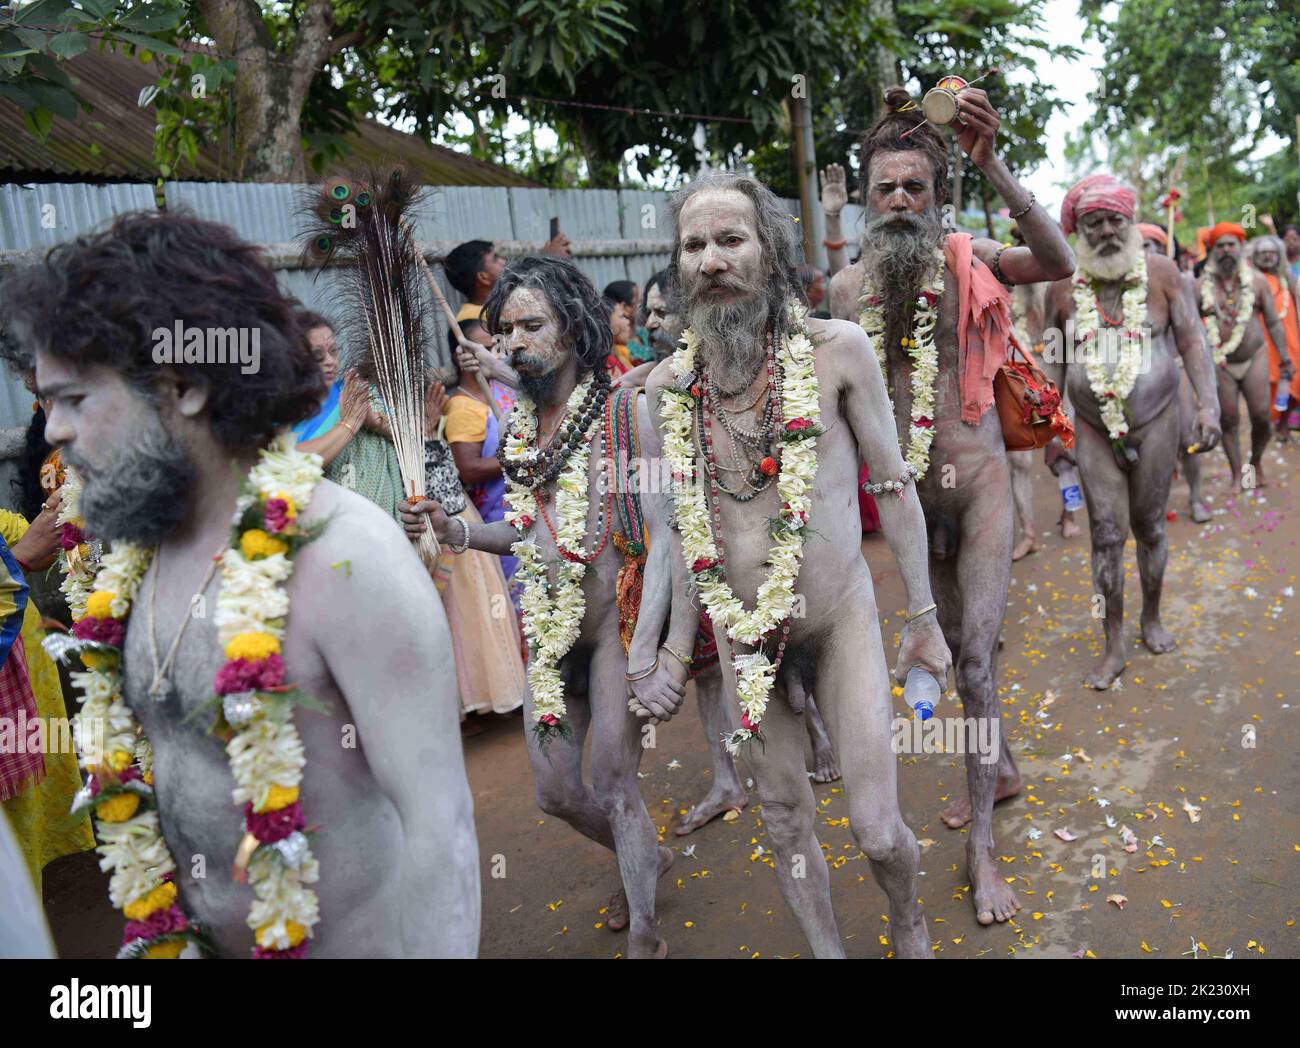 Naga Sadhus (Naked Yogis) perform different religious practices during 'Kumbh Mela' in Ranirbazar, Agartala. Kumbh Mela or Kumbha Mela is a major pilgrimage and festival in Hinduism. It is celebrated in a cycle of approximately 12 years, to celebrate every revolution Brihaspati completes. Tripura, India. Stock Photo